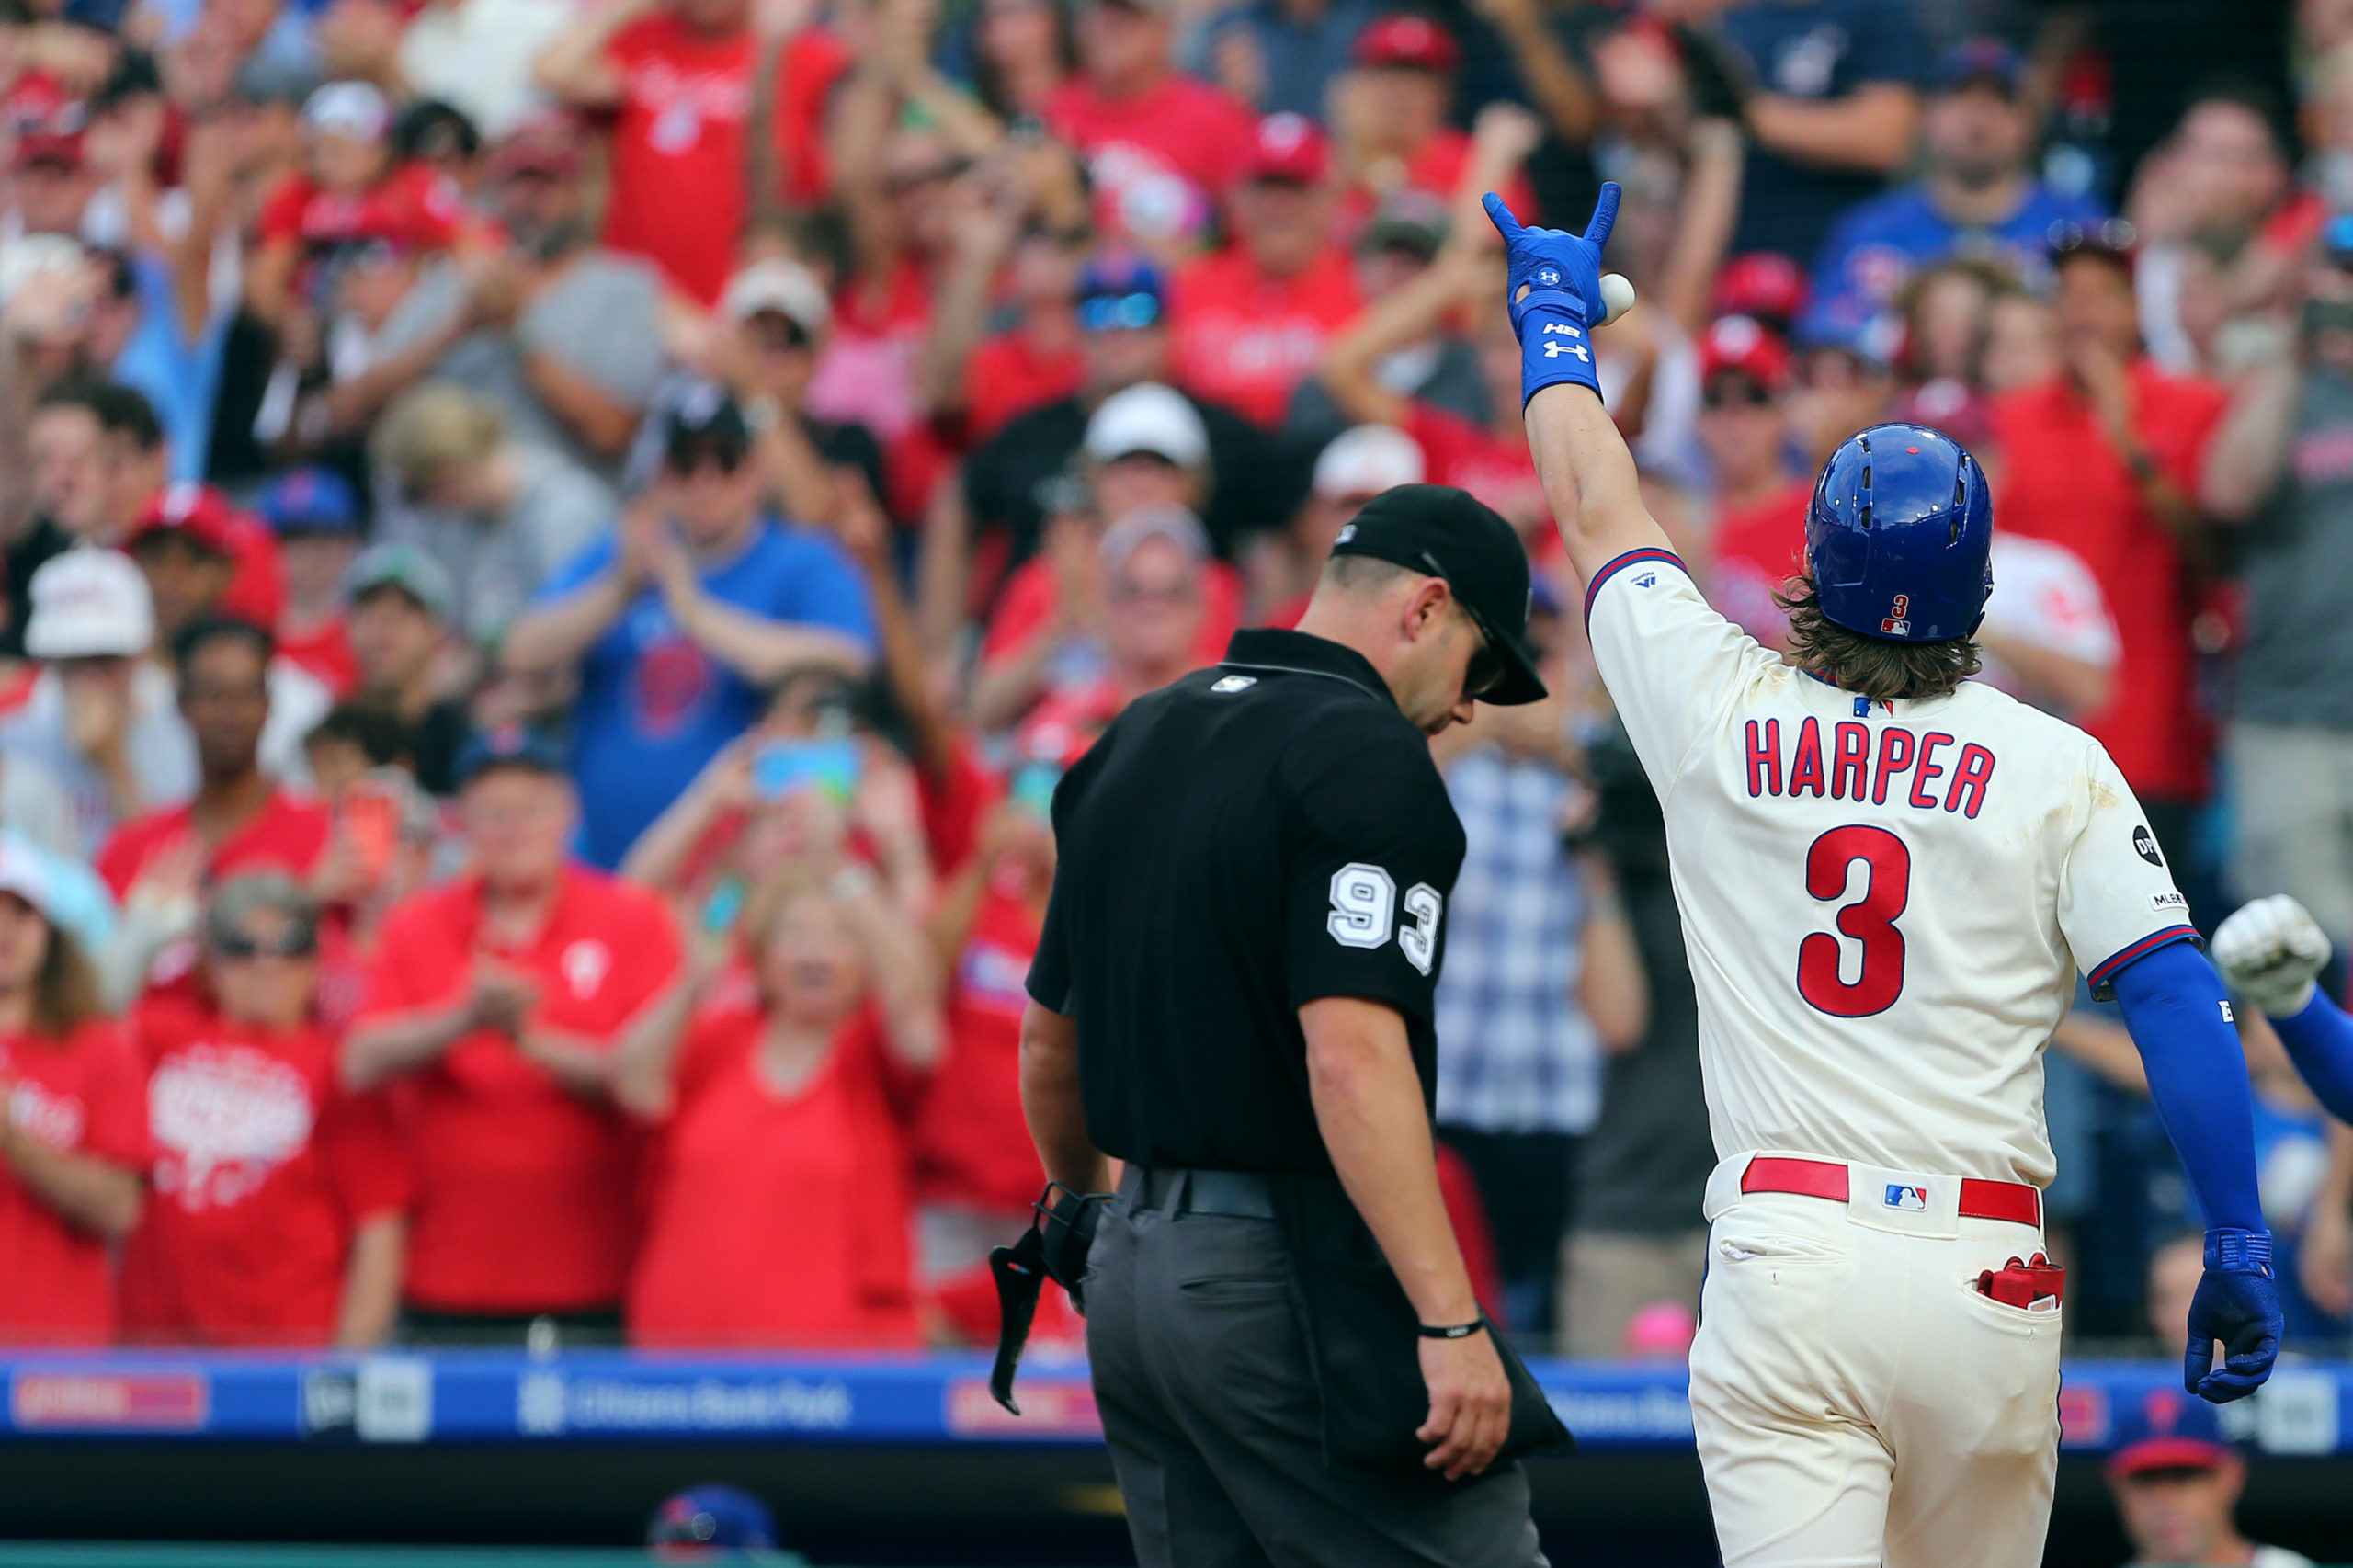 PHILADELPHIA, PA - AUGUST 31: Bryce Harper #3 of the Philadelphia Phillies gestures to the fans after he hit a home run against the New York Mets during the sixth inning of a game at Citizens Bank Park on August 31, 2019 in Philadelphia, Pennsylvania. (Photo by Rich Schultz/Getty Images)